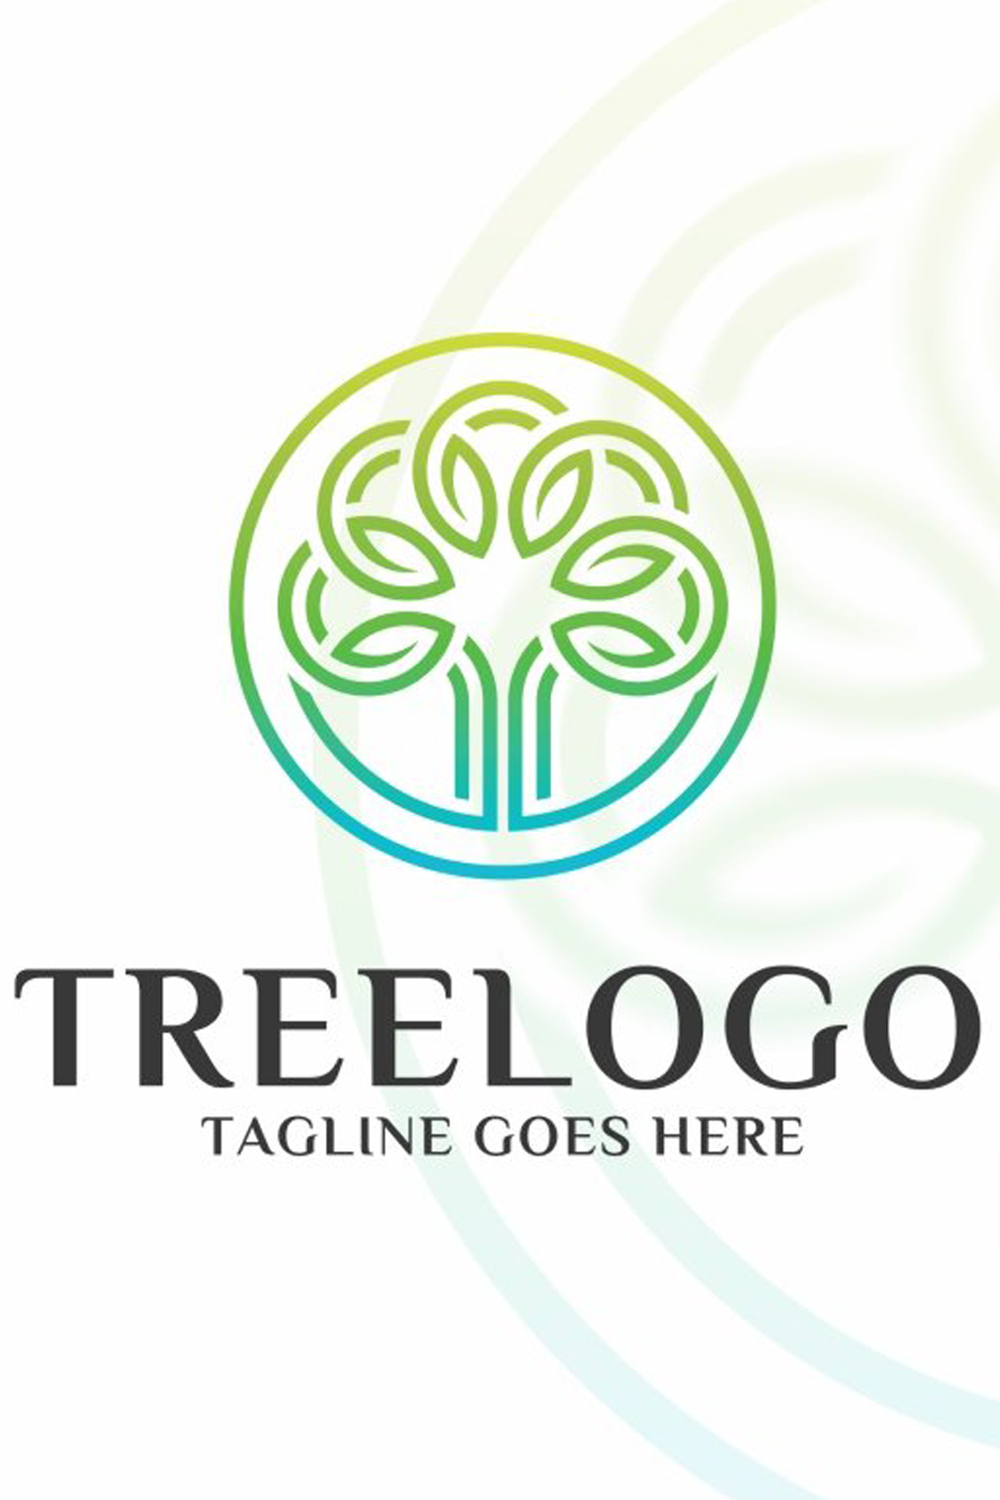 A logo depicting a tree whose crown is represented by circles.